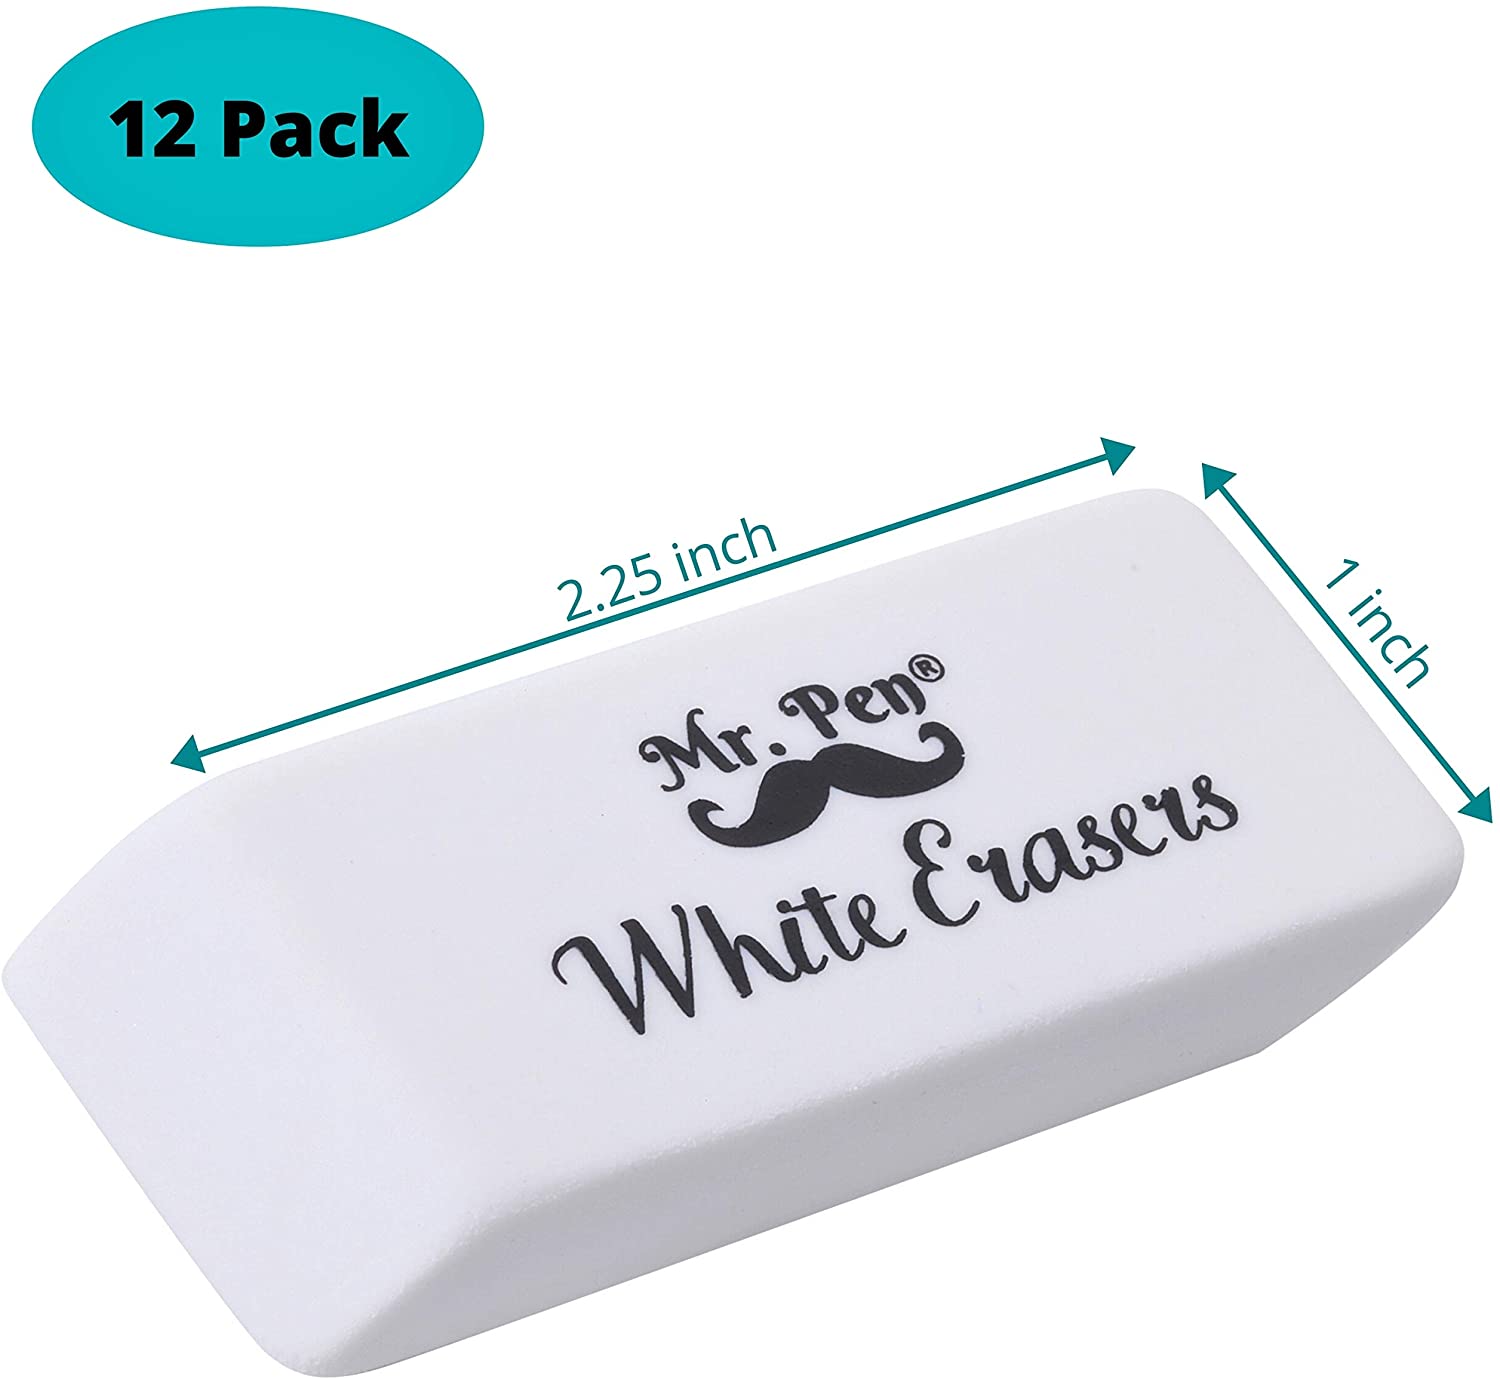 Paper Mate White Pearl Erasers, Large, 12 Count